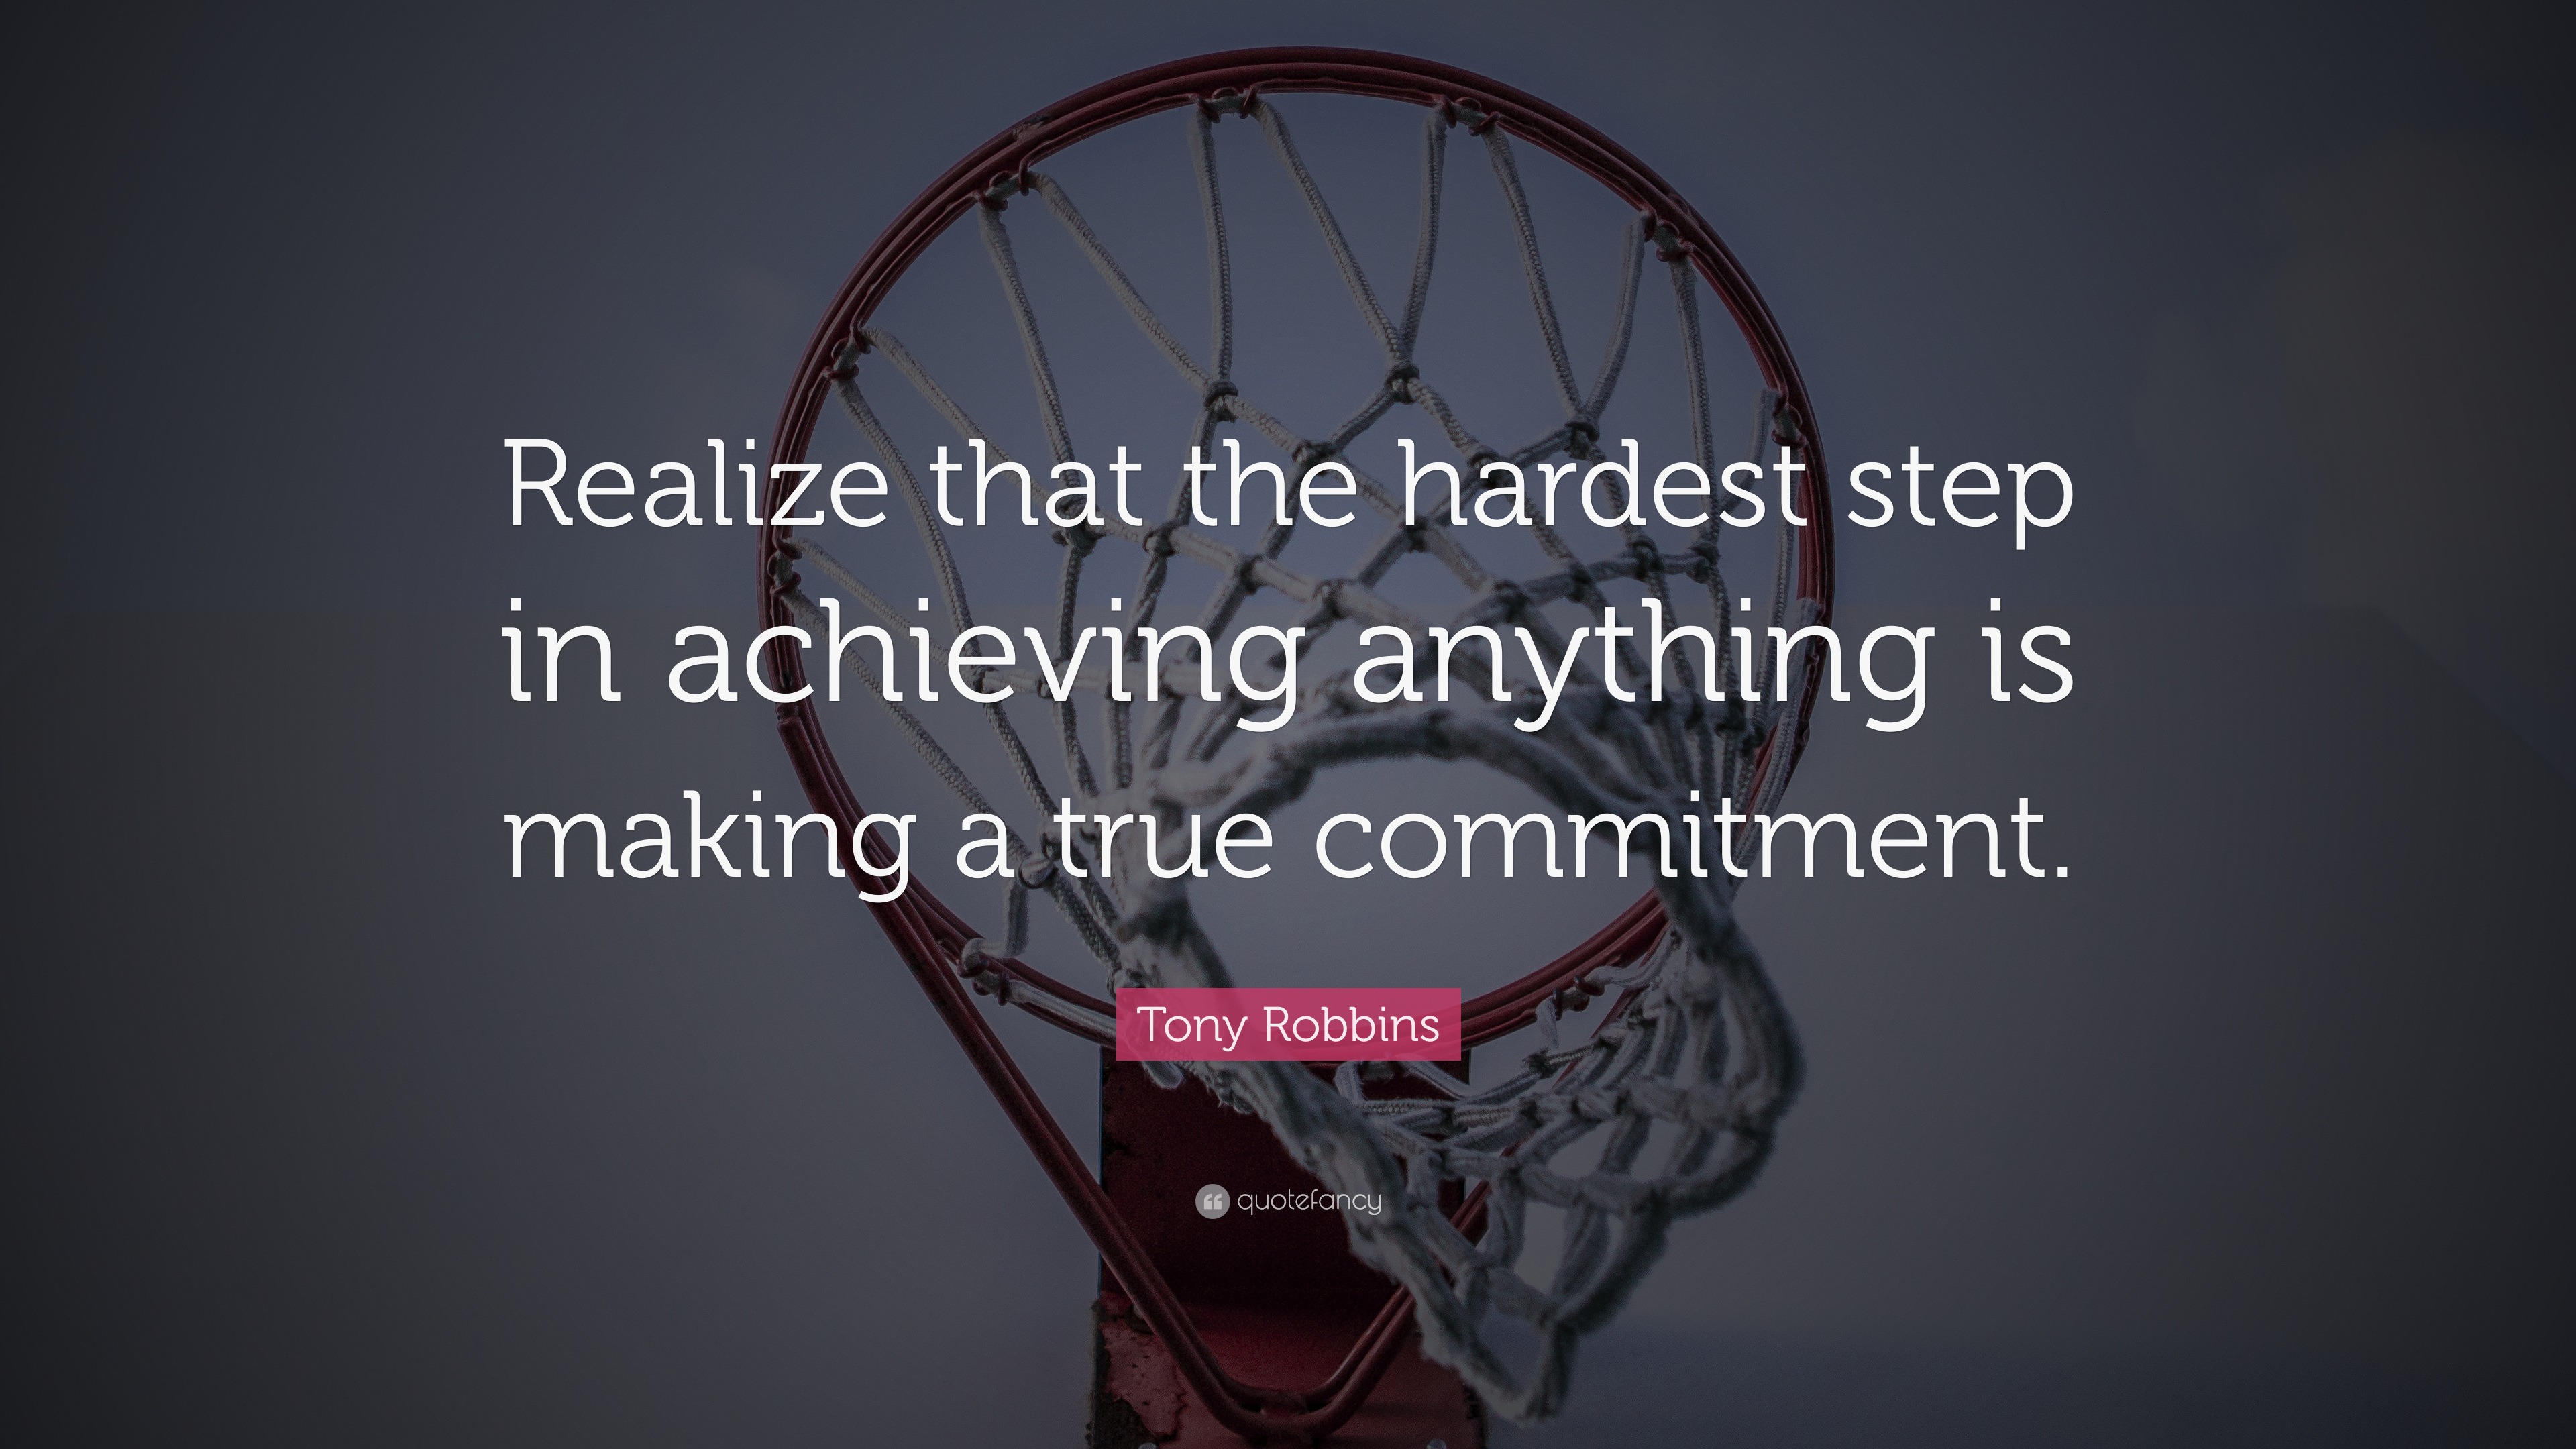 Tony Robbins Quote: “Realize that the hardest step in achieving ...